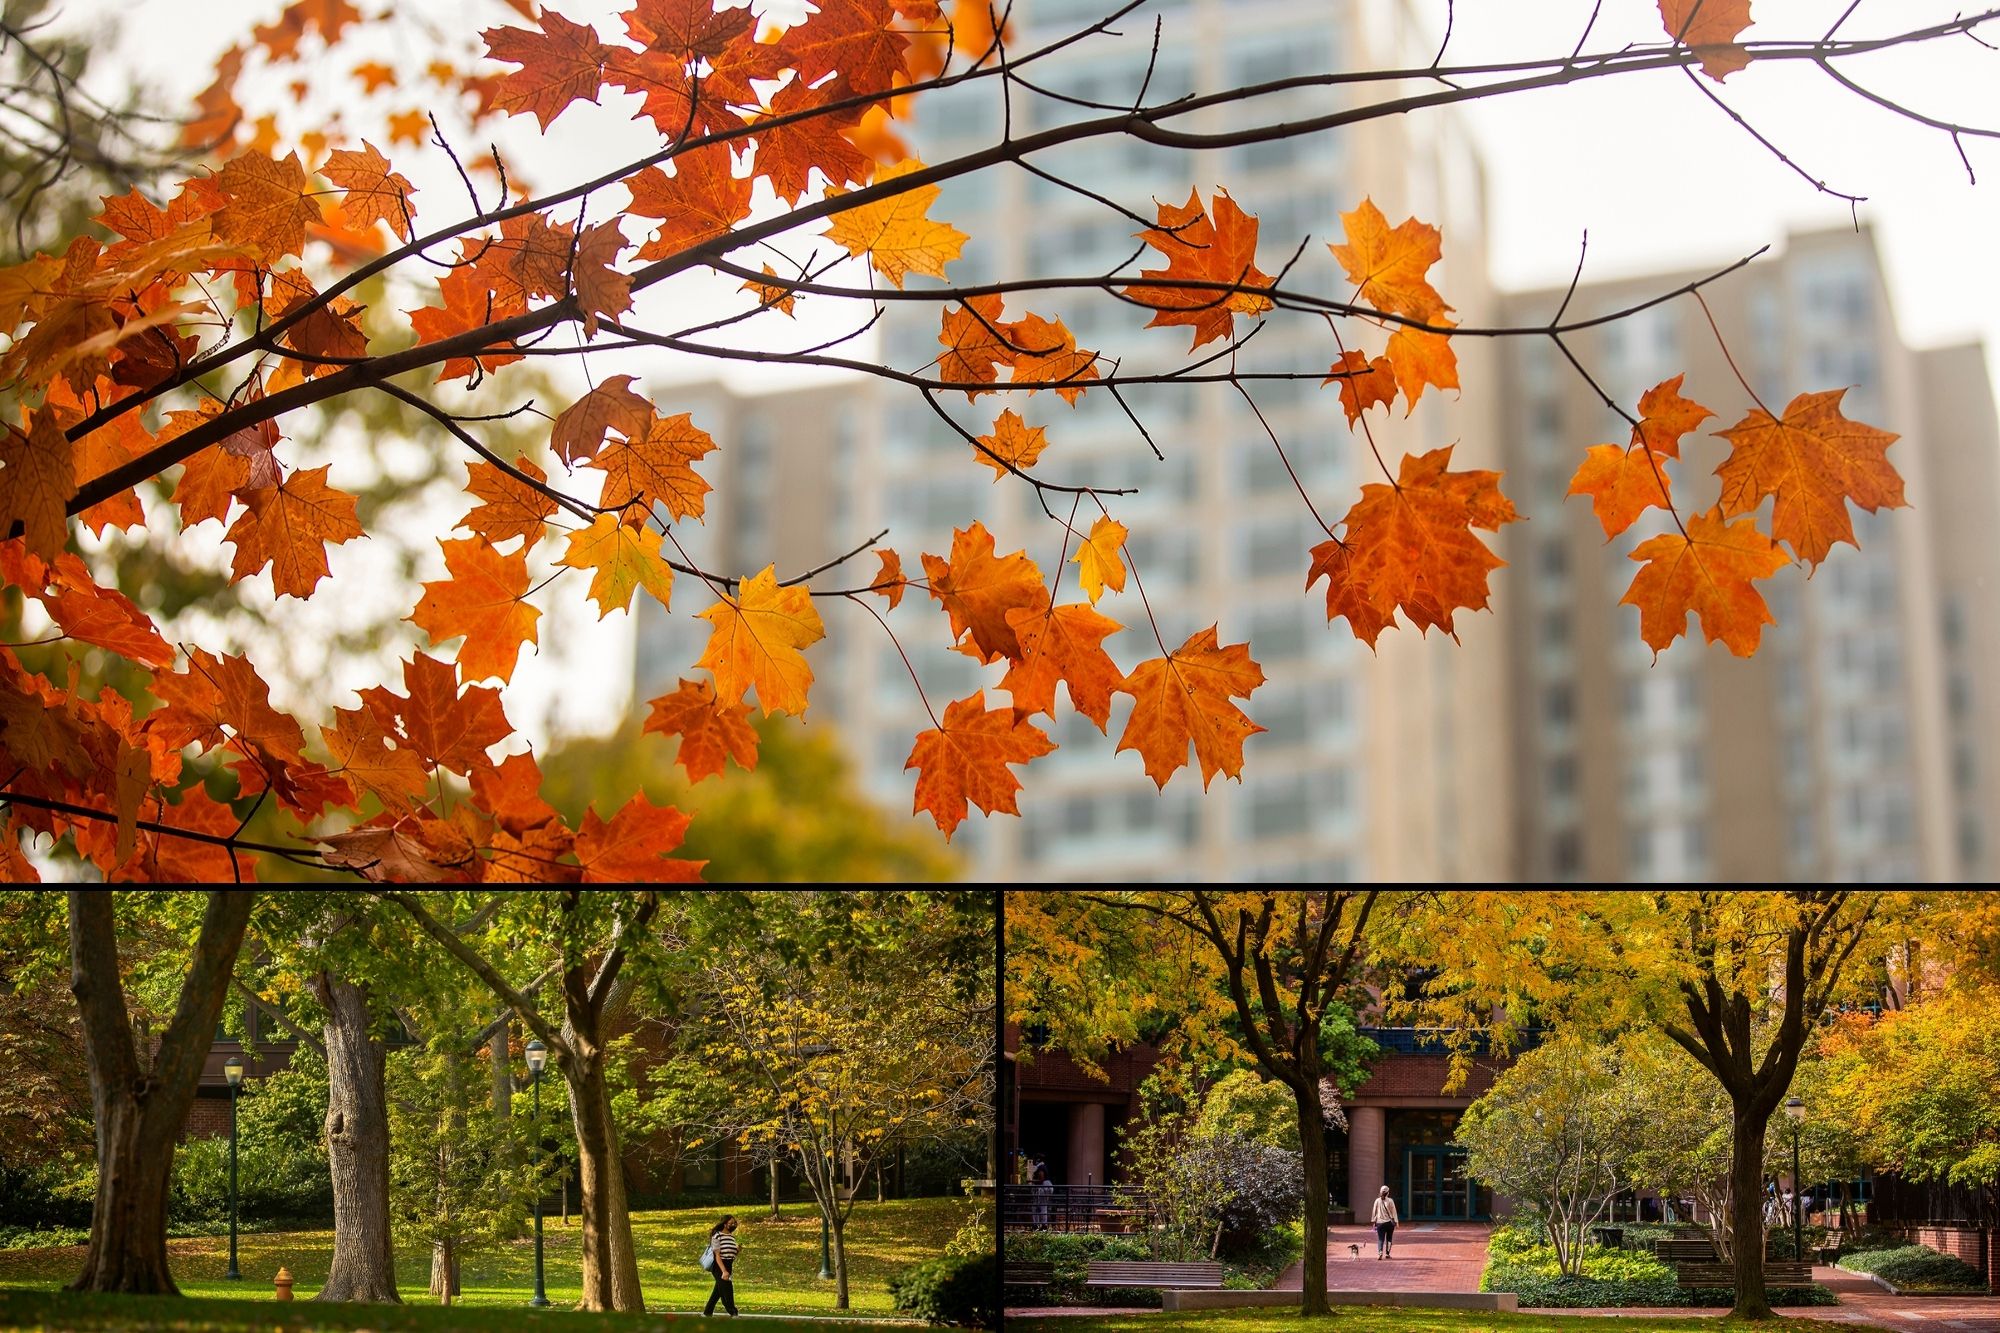 Triptych grid of fall foliage, top image has orange leaves with a college dorm residence building in the background, the bottom two are yellow fall trees on Locust Walk with the Van Pelt Library in the background